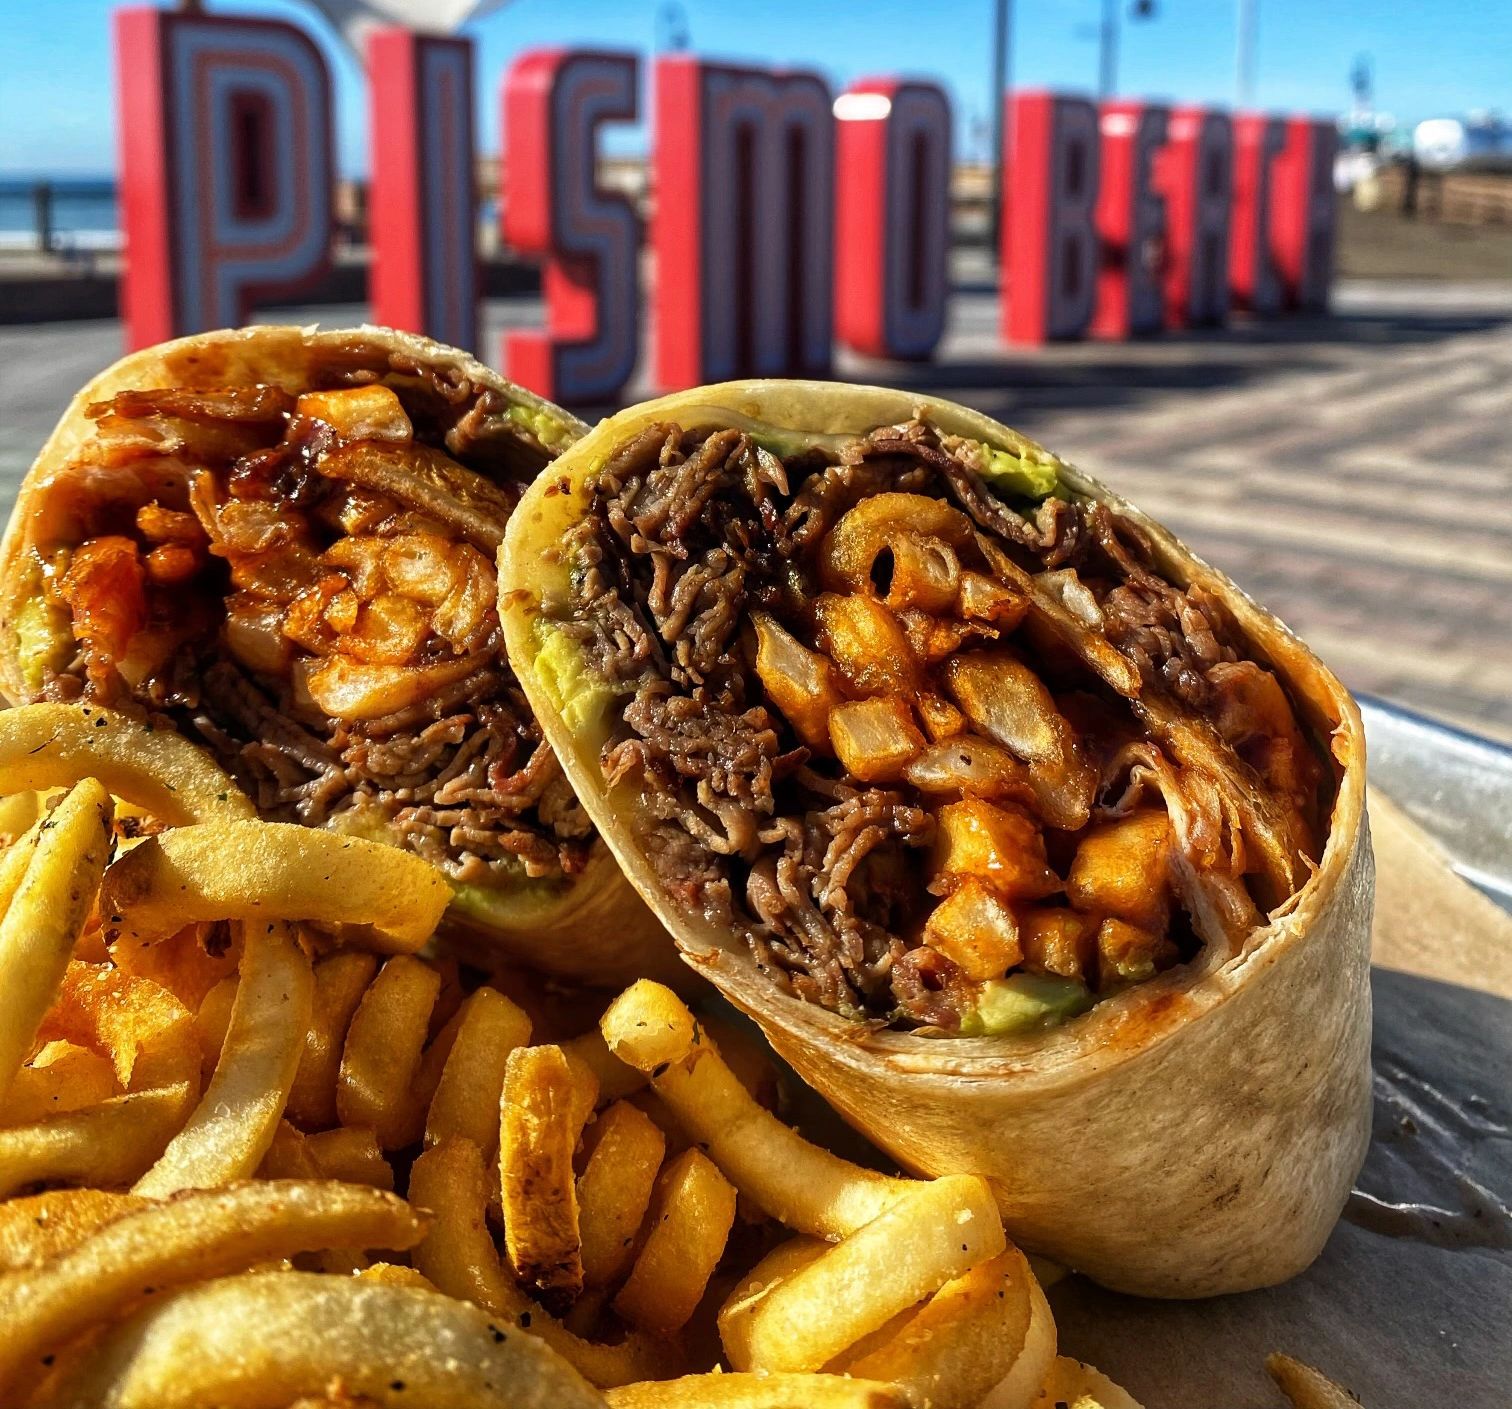 Pismo Wrap with tri tip, bbq, fries, cheese, and avocado in front of the Pismo Beach sign.